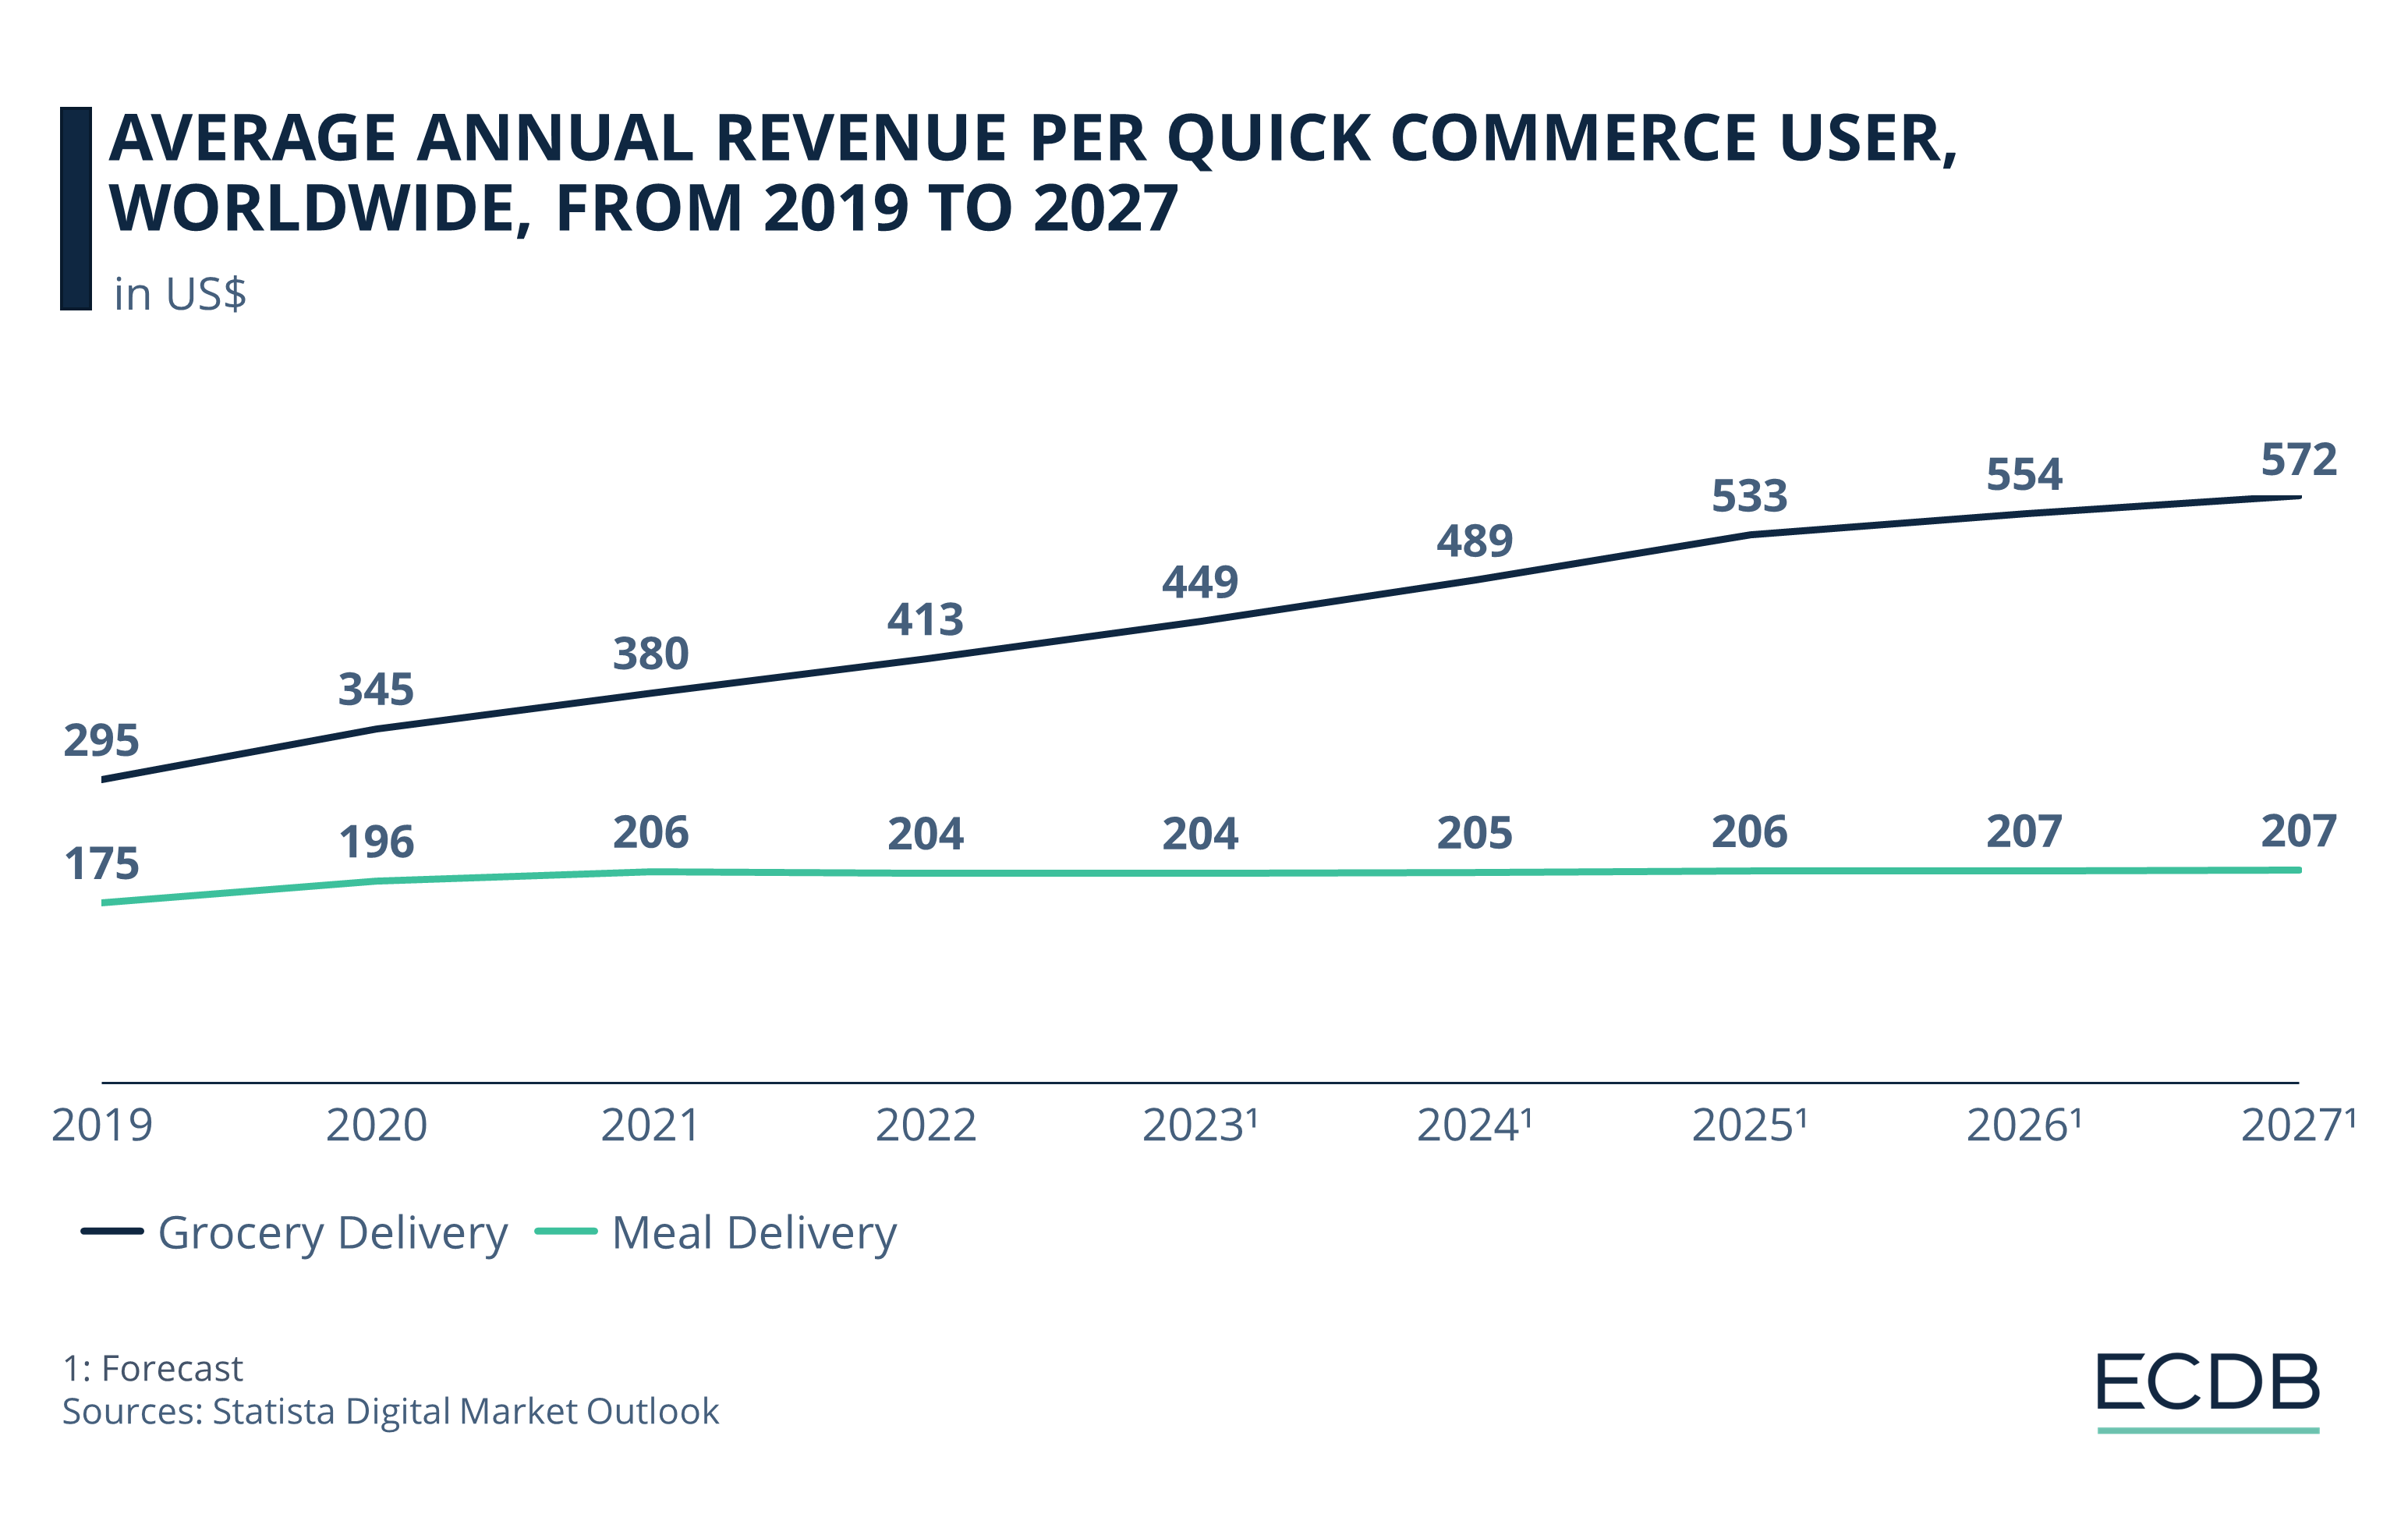 Average Annual Revenue per Quick Commerce User, Worldwide, from 2019 to 2027